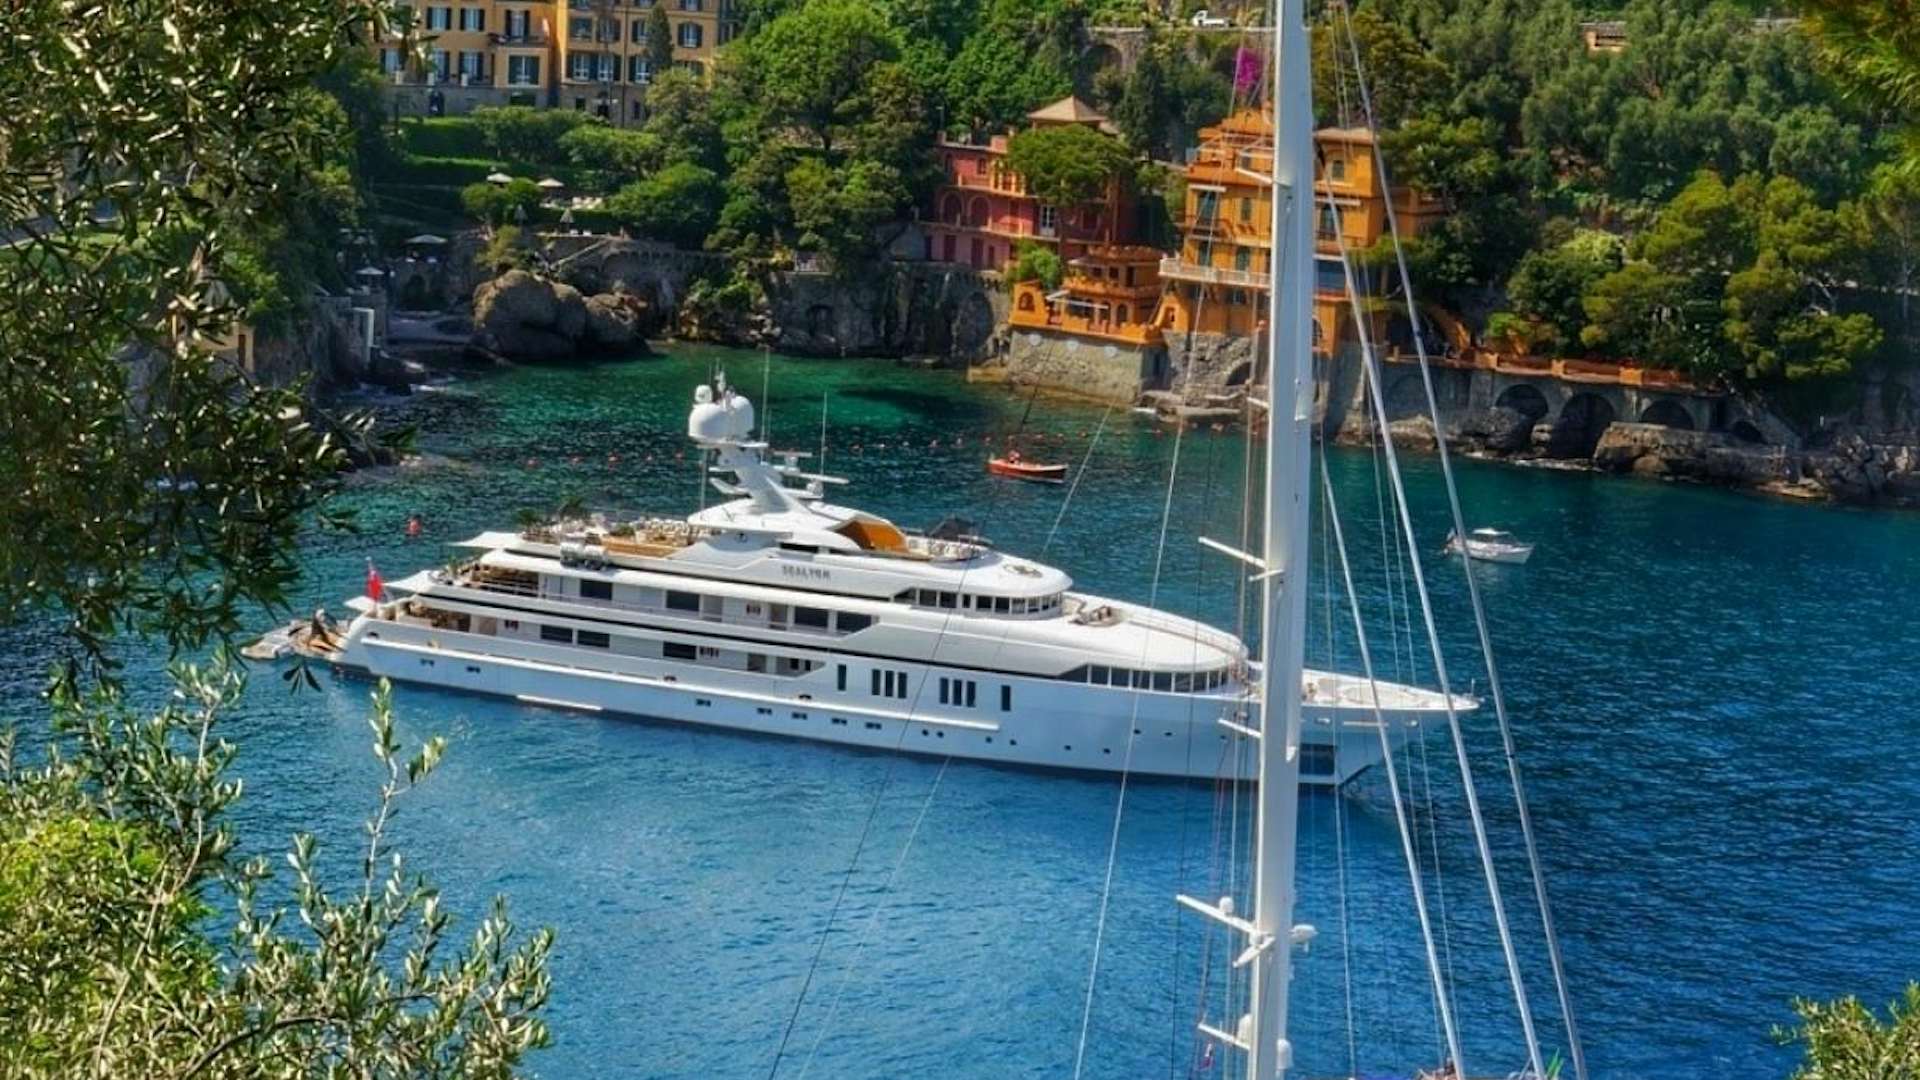 Watch Video for SEALION Yacht for Sale